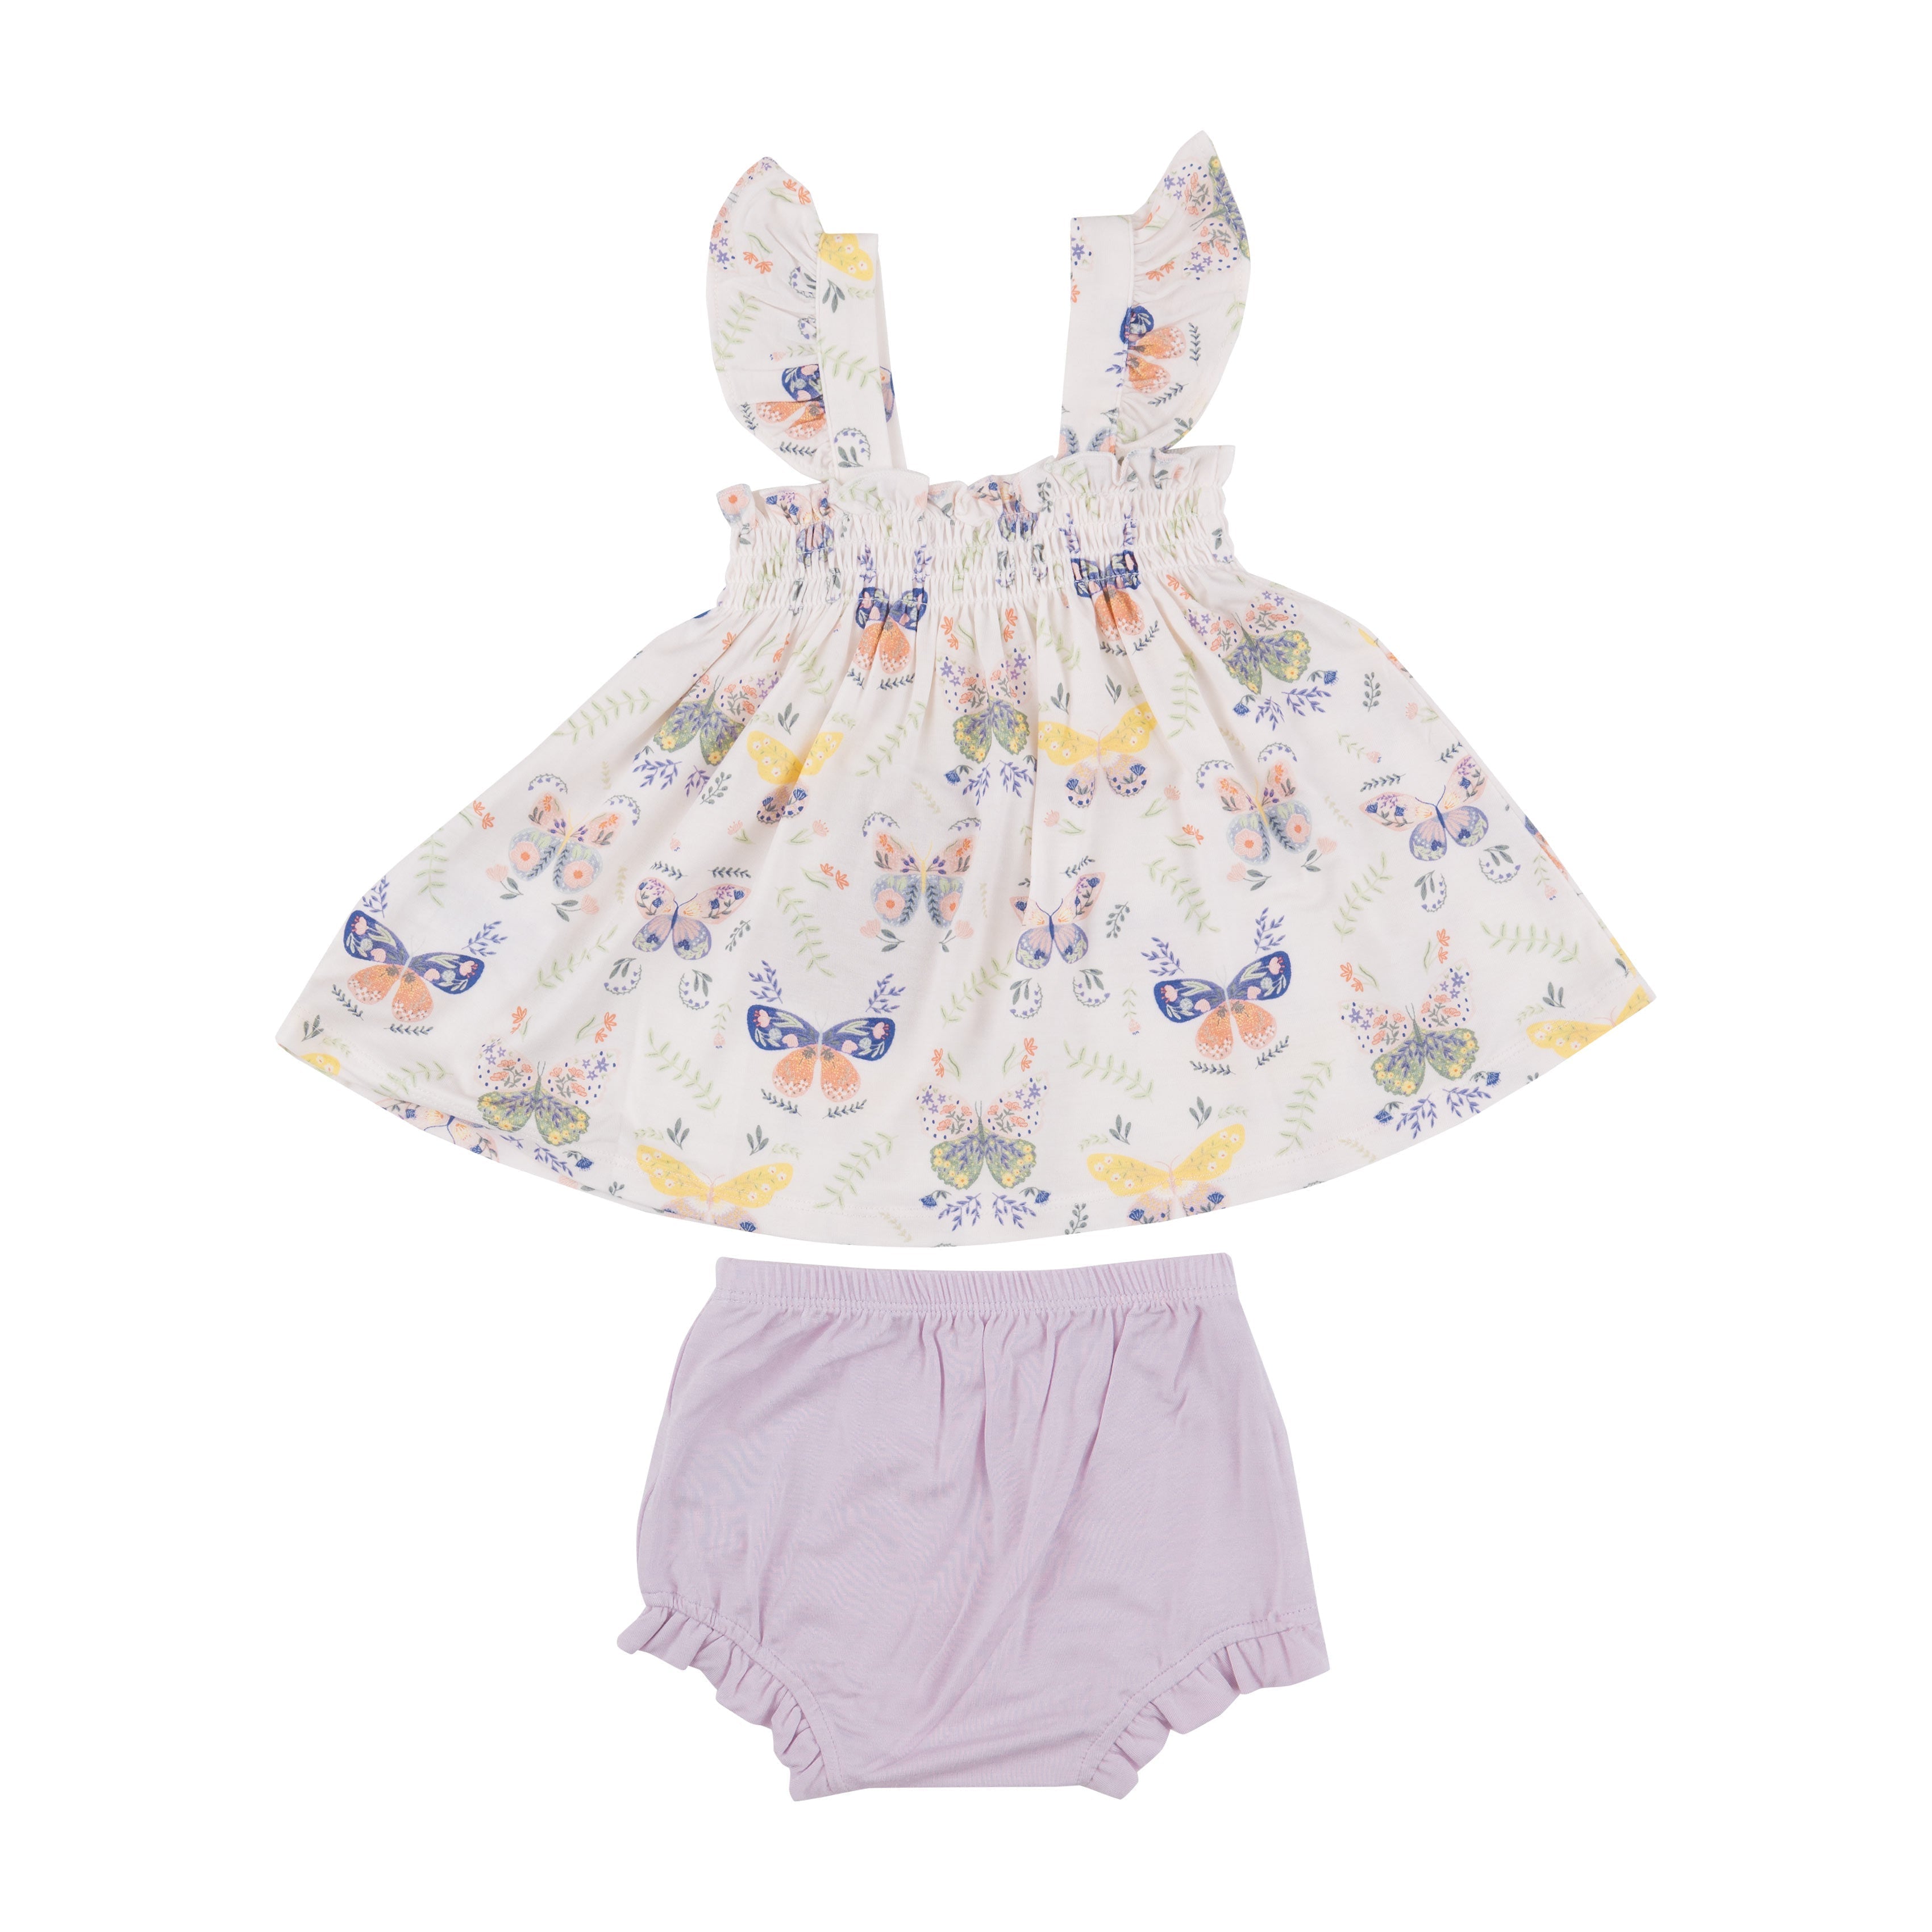 Ruffle Strap Smocked Top And Diaper Cover - Botany Butterflies